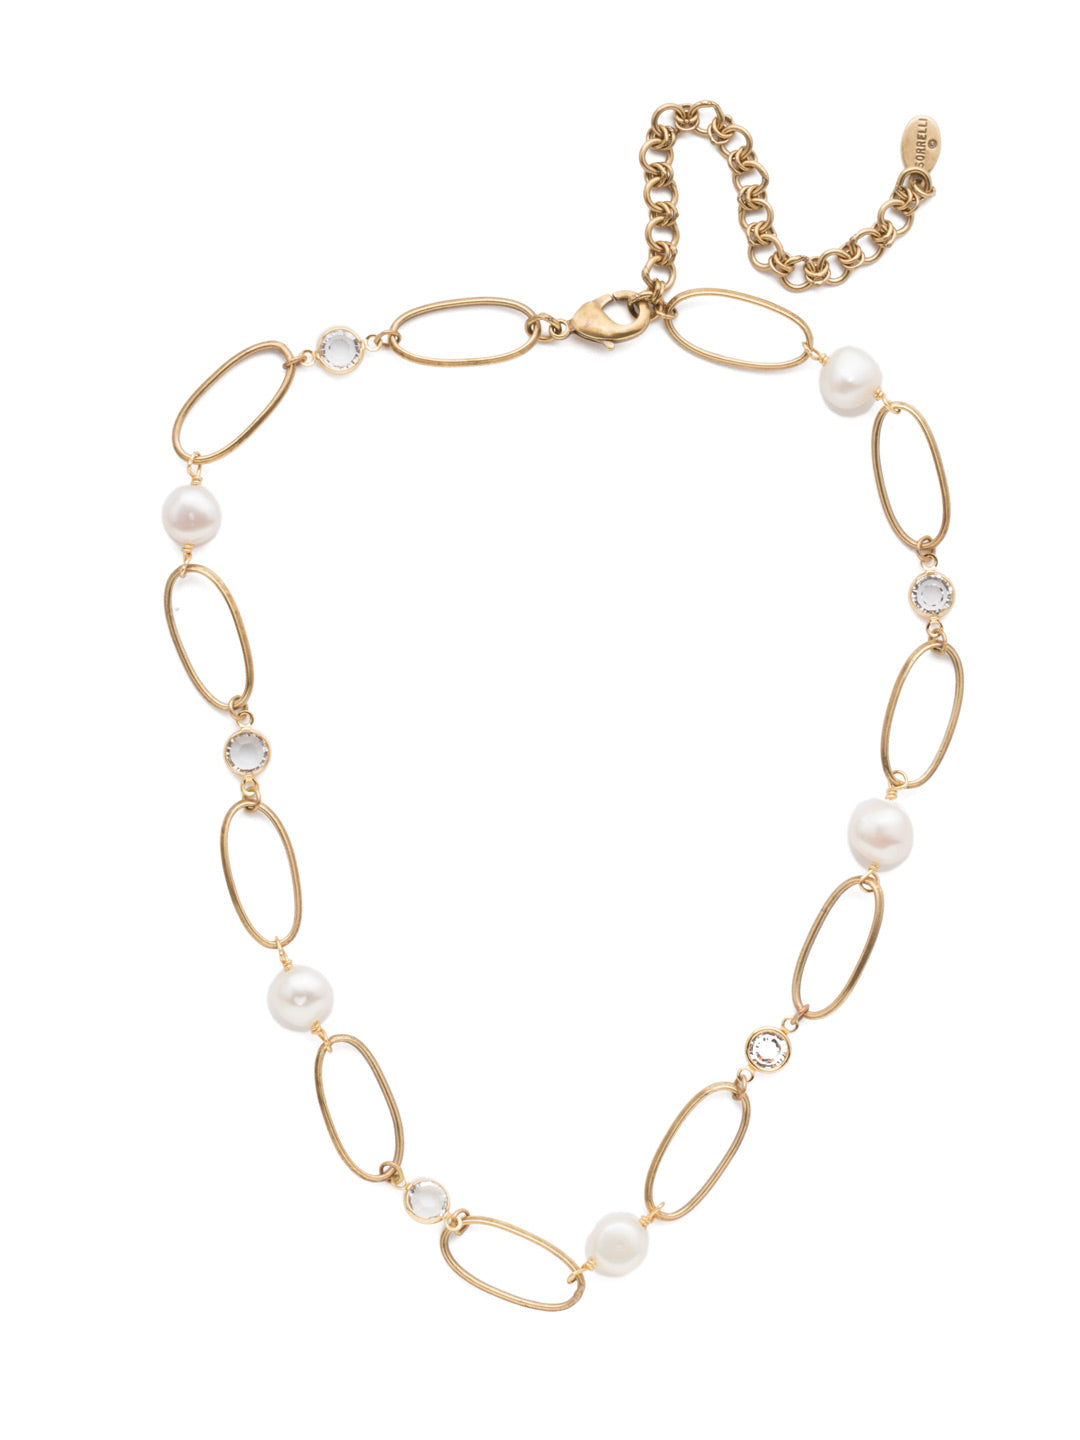 Langley Tennis Necklace - 4NET7MXMDP - <p>The Langley Tennis Necklace features airy chain links of metal at its core, but it doesn't forget the beauty that can be added with a touch of shining gems and freshwater pearls. From Sorrelli's Modern Pearl collection in our Mixed Metal finish.</p>